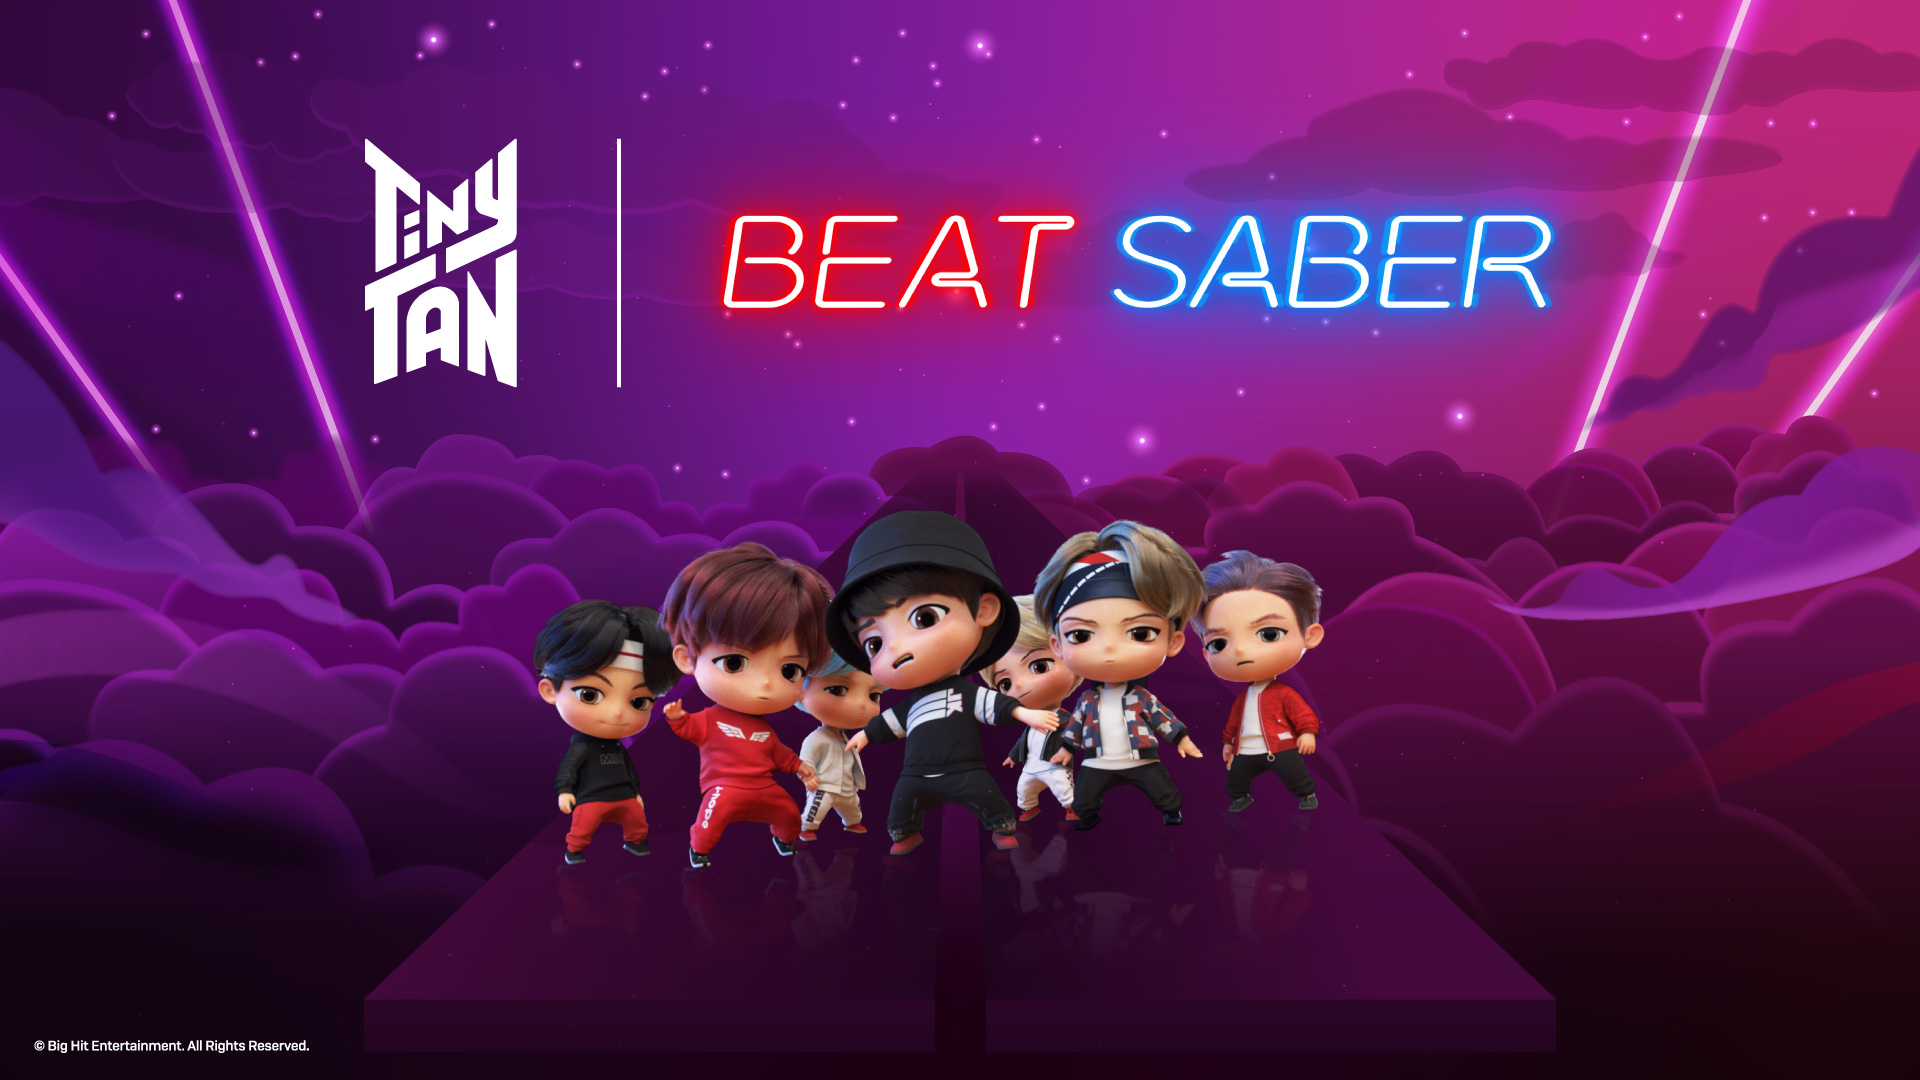 Saber on Twitter: "Brighten up your screen and your day with the @TinyTANofficial Beat Saber BTS Music Pack wallpapers. 🖥️ Full HD - https://t.co/VsDtdgtKOV 🖥️ - https://t.co/yhF76fcvVo 🖥️